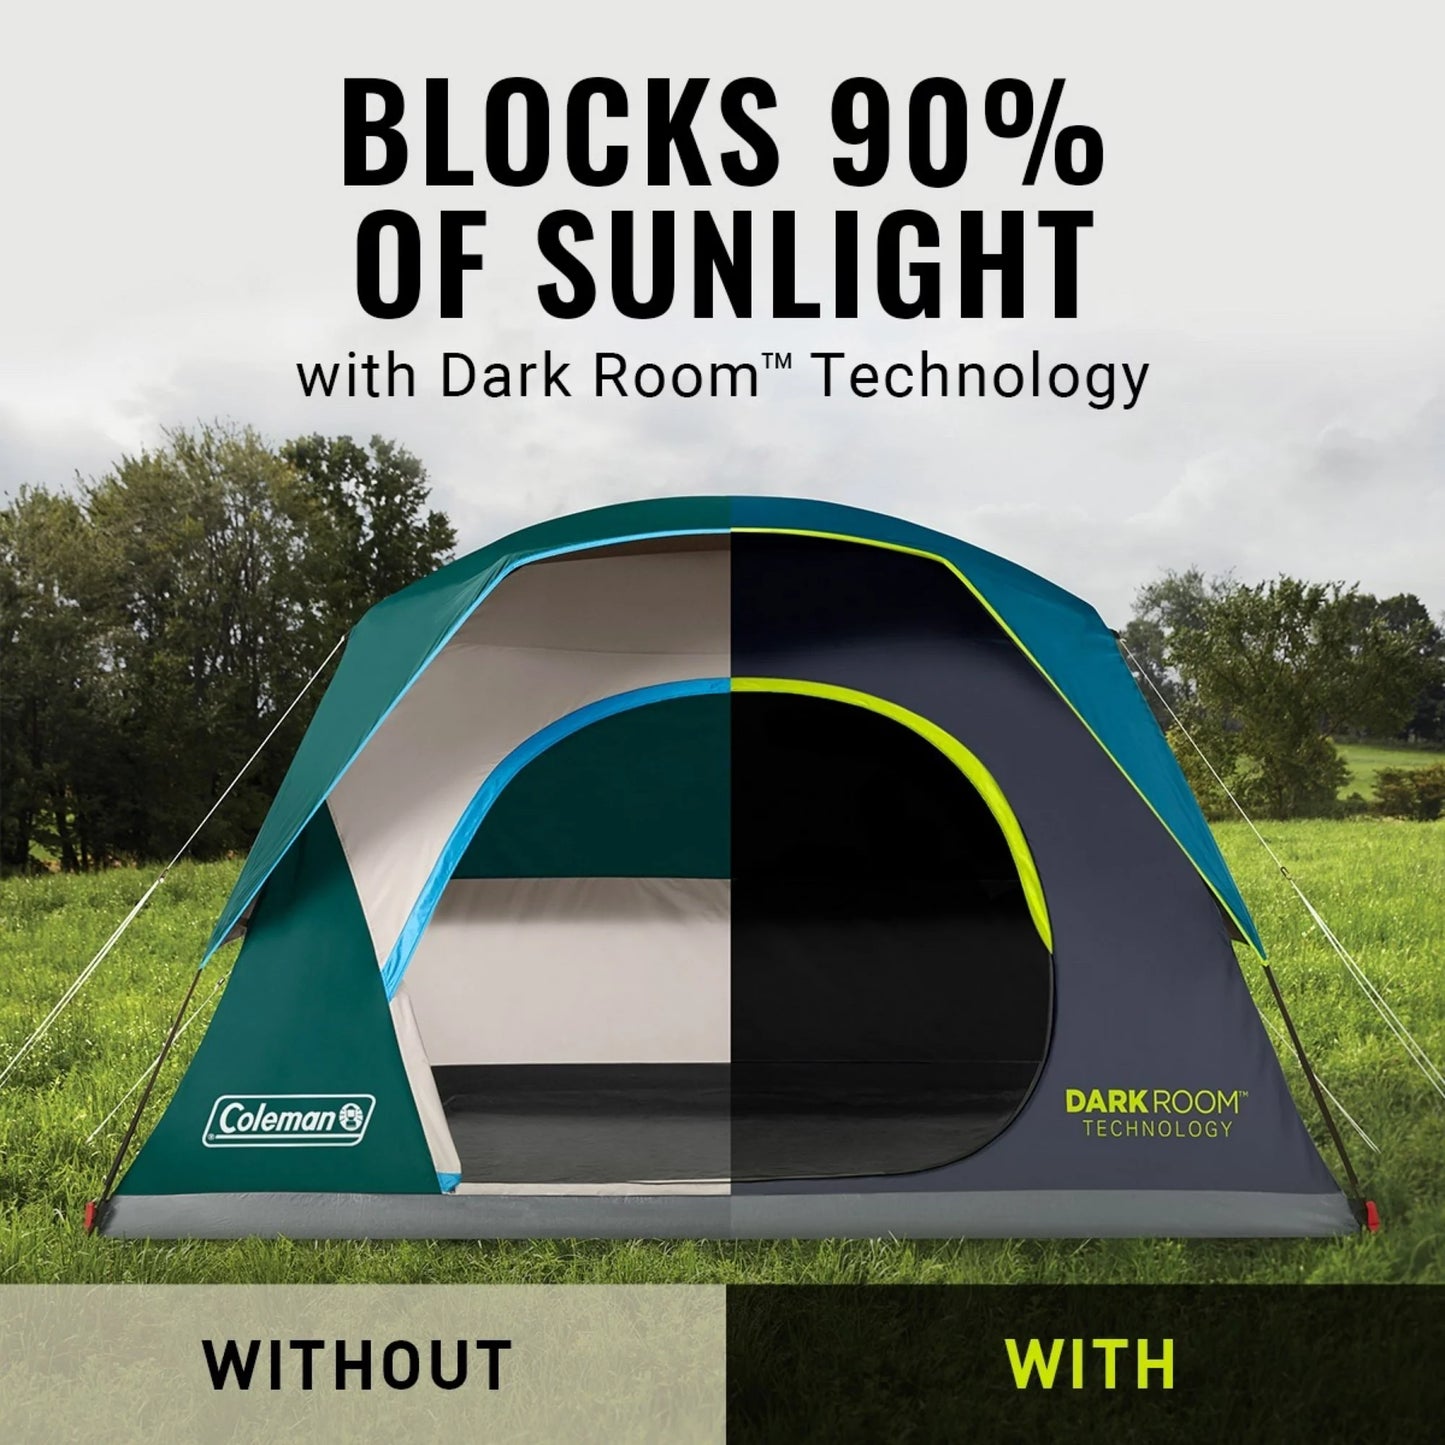 4-Person Dark Room™ Skydome™ Camping Tent